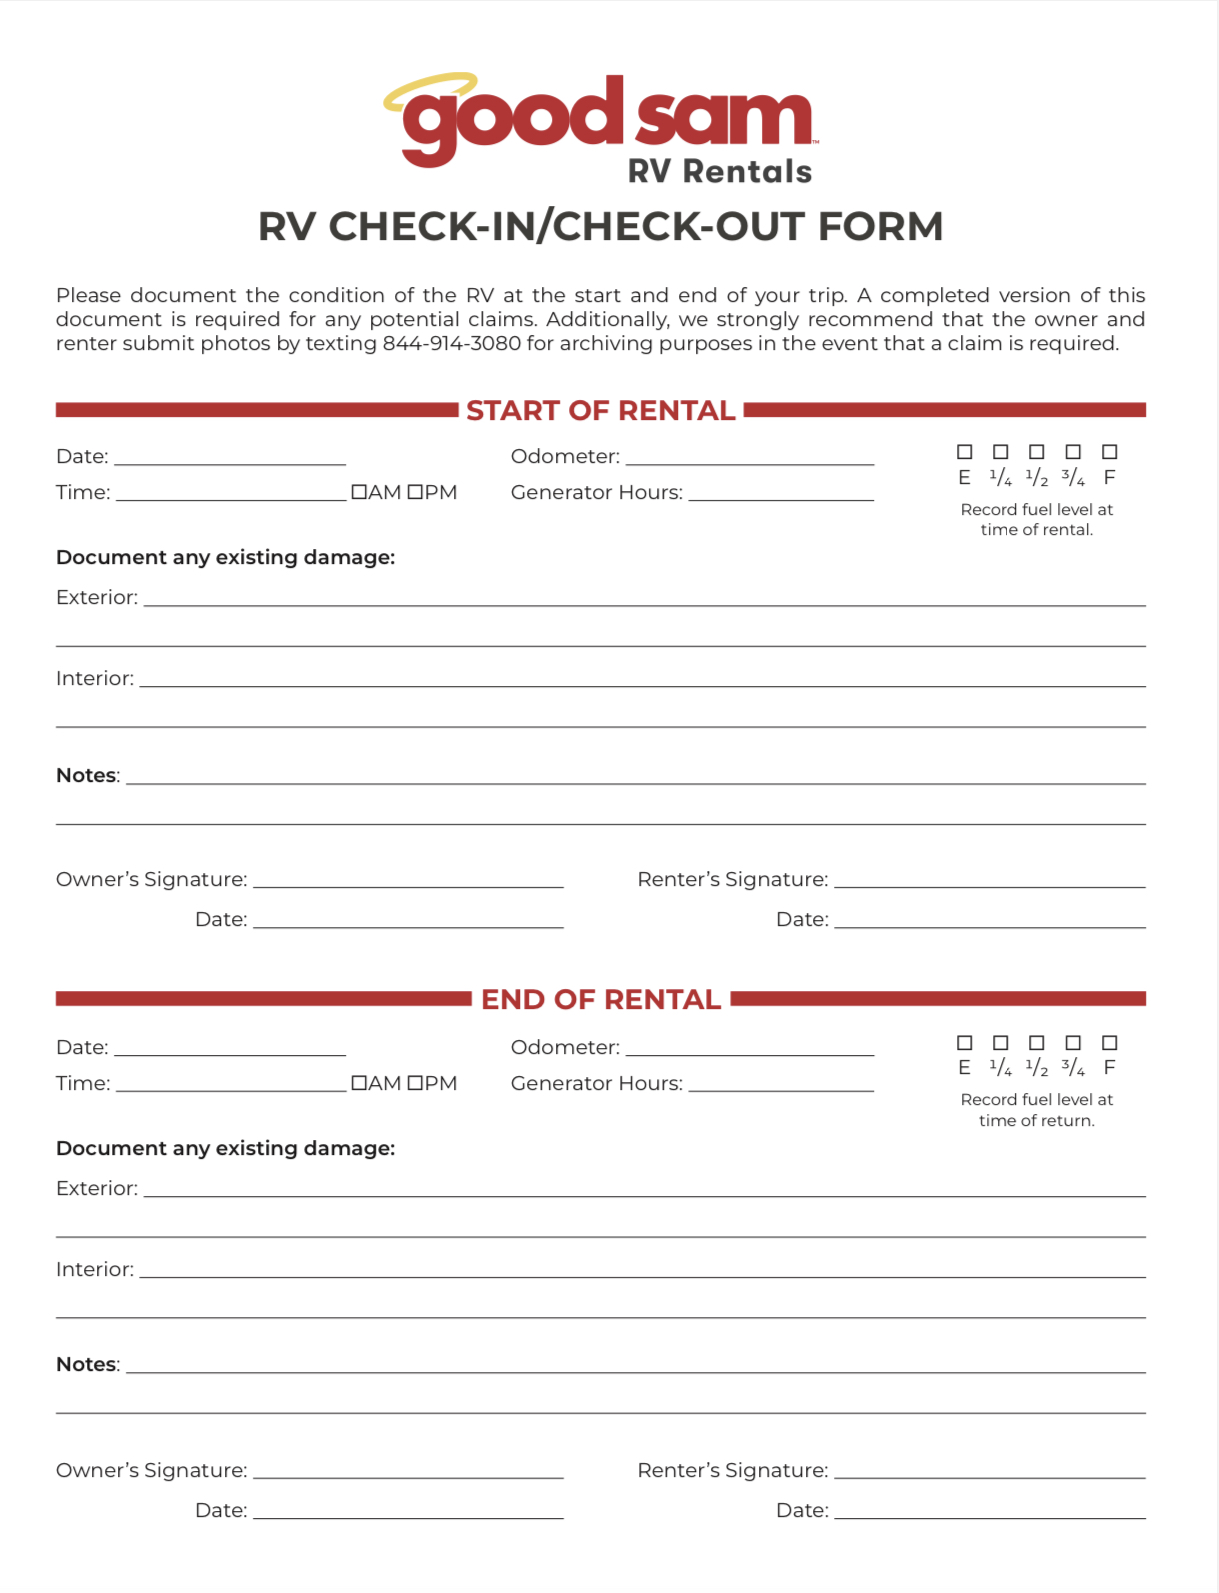 RV Check-in/Check Out form for Good Sam RV Rentals